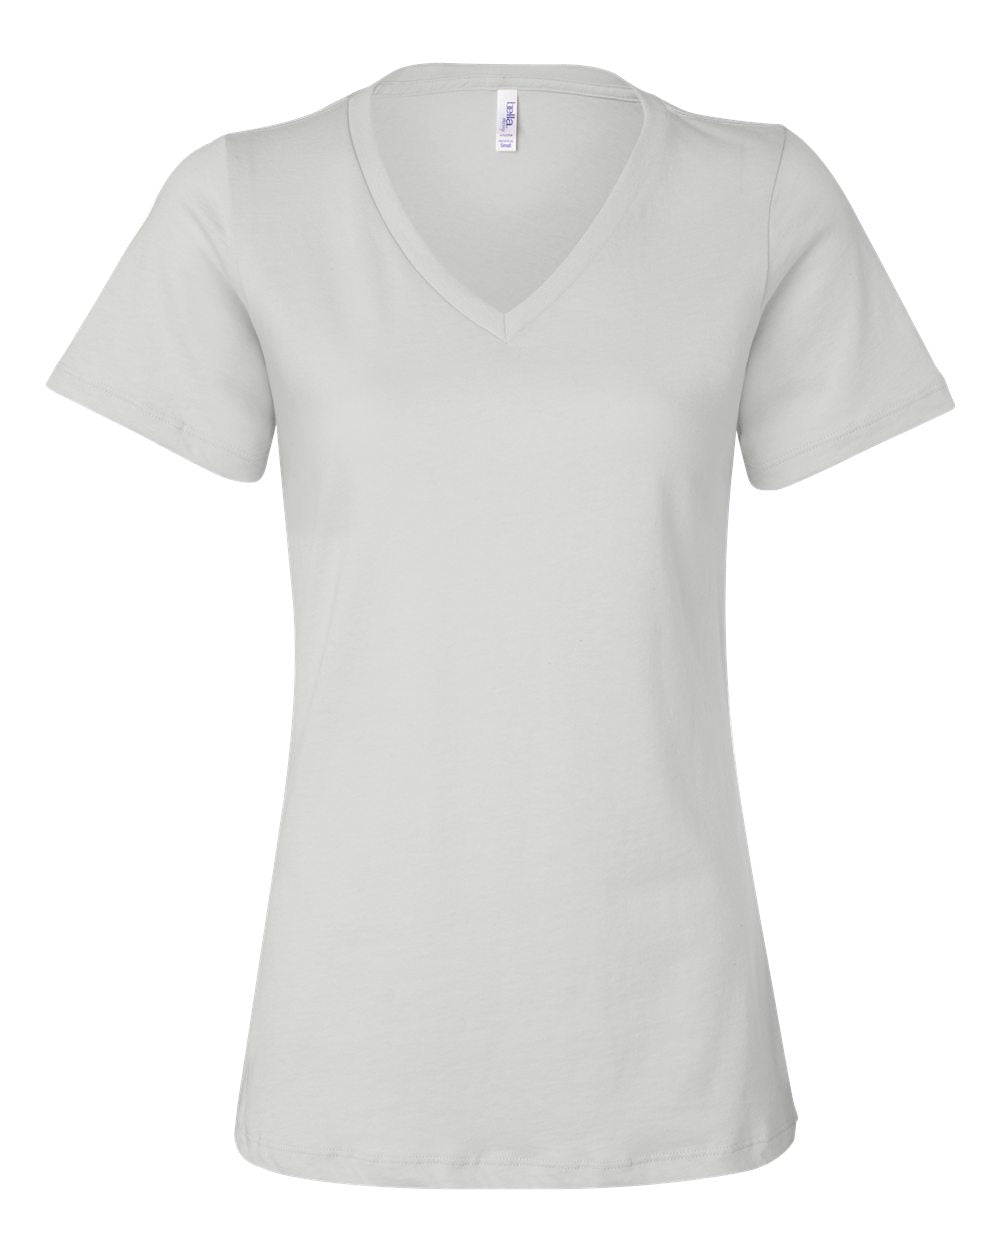 Relaxed Jersey Ladies V-Neck Tee - BELLA + CANVAS 6405